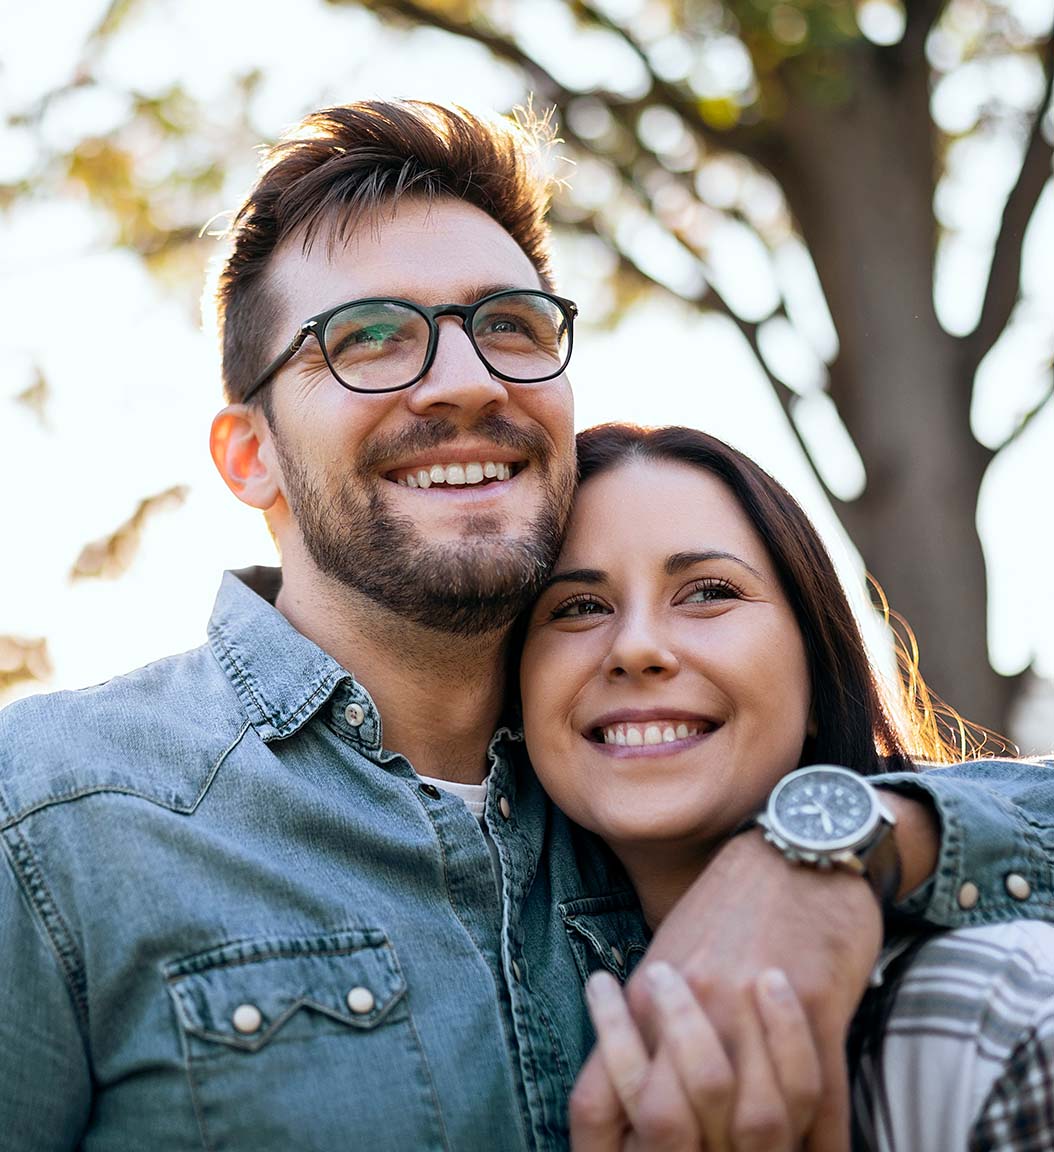 Brunette man with glasses and denim shirt and brunette woman, holding hands and smiling outside by a tree.